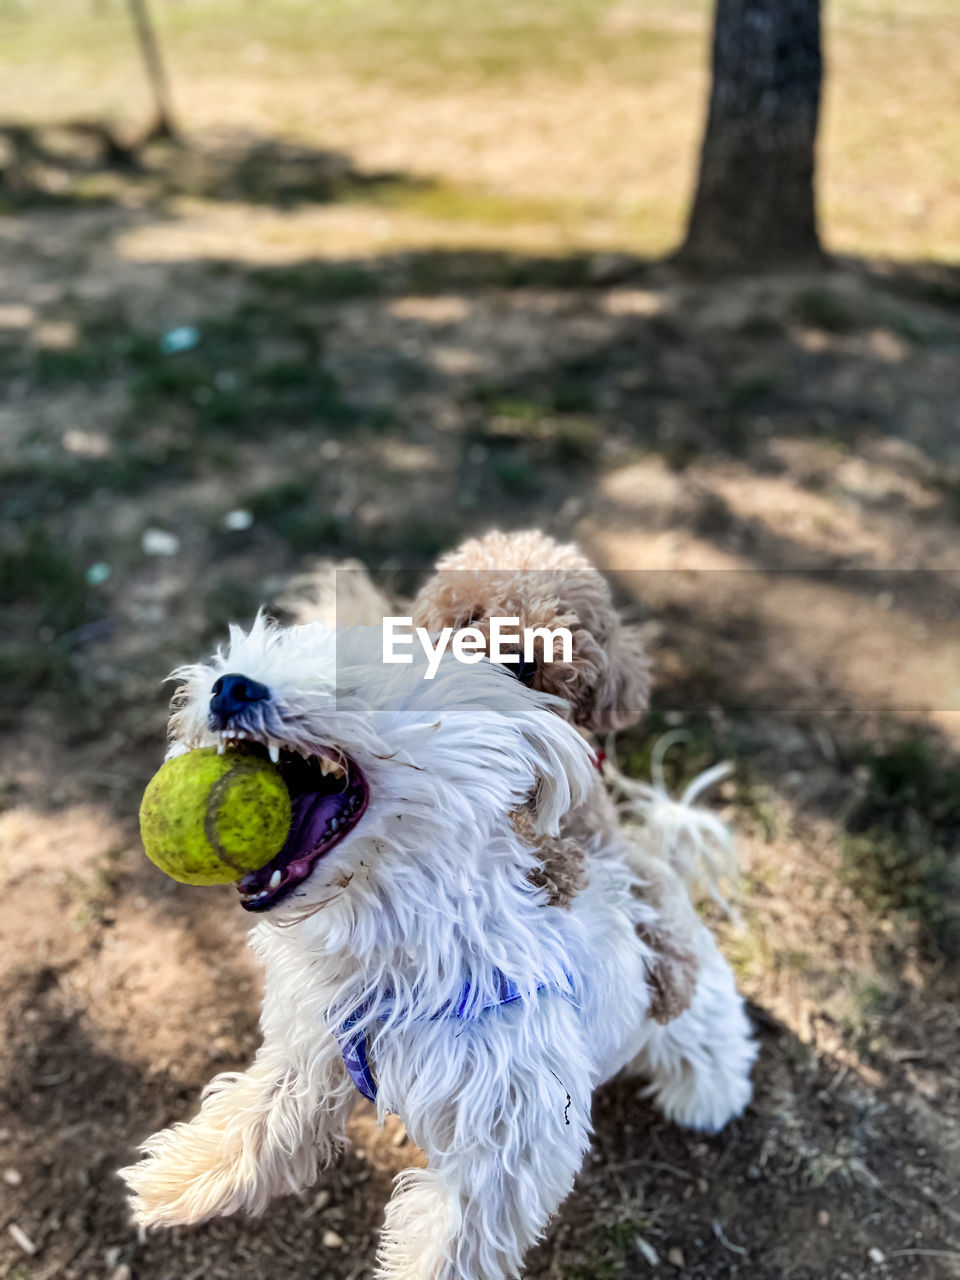 canine, dog, animal, animal themes, domestic animals, one animal, pet, mammal, nature, no people, puppy, lap dog, ball, day, cute, animal hair, outdoors, focus on foreground, tennis ball, tennis, plant, motion, sunlight, sports, poodle